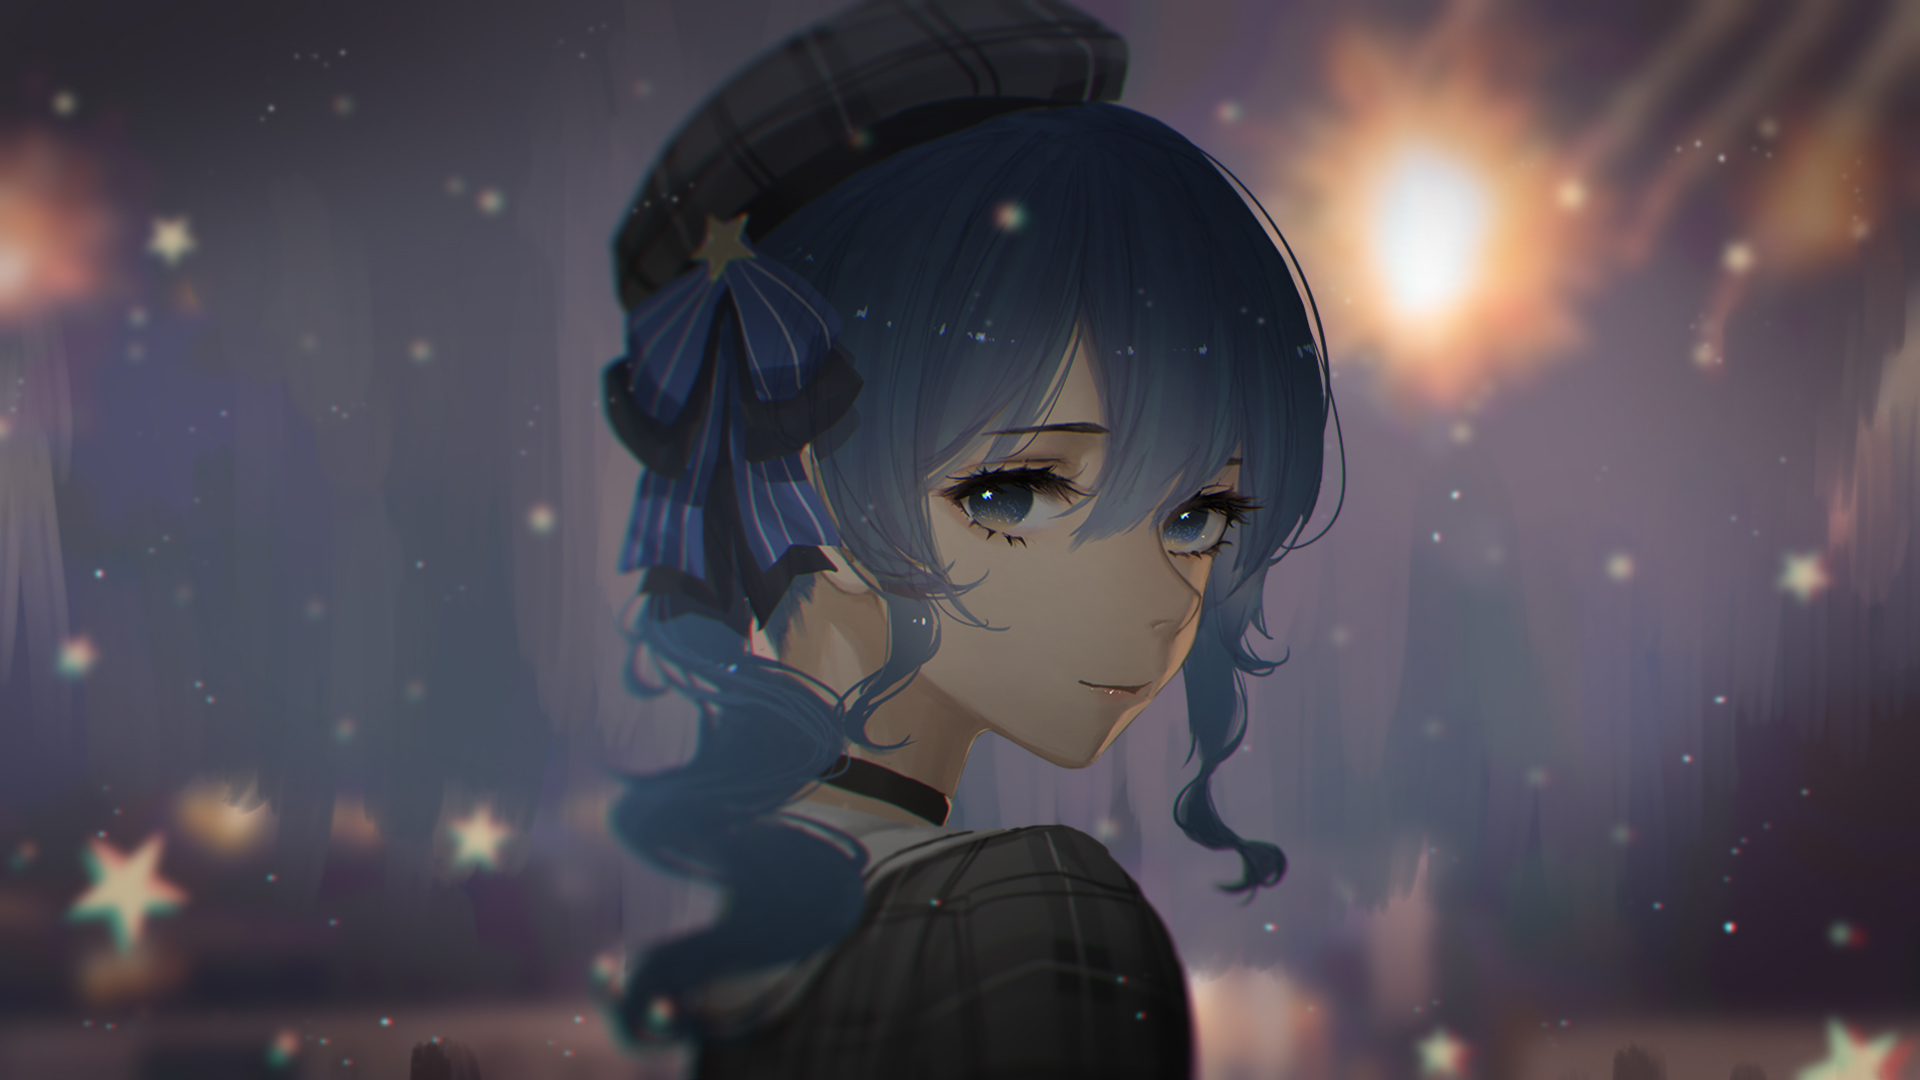 Anime Anime Girls Hololive Suisei Hoshimachi Blue Hair Blue Eyes Hat Berets Stars Looking At Viewer 1920x1080